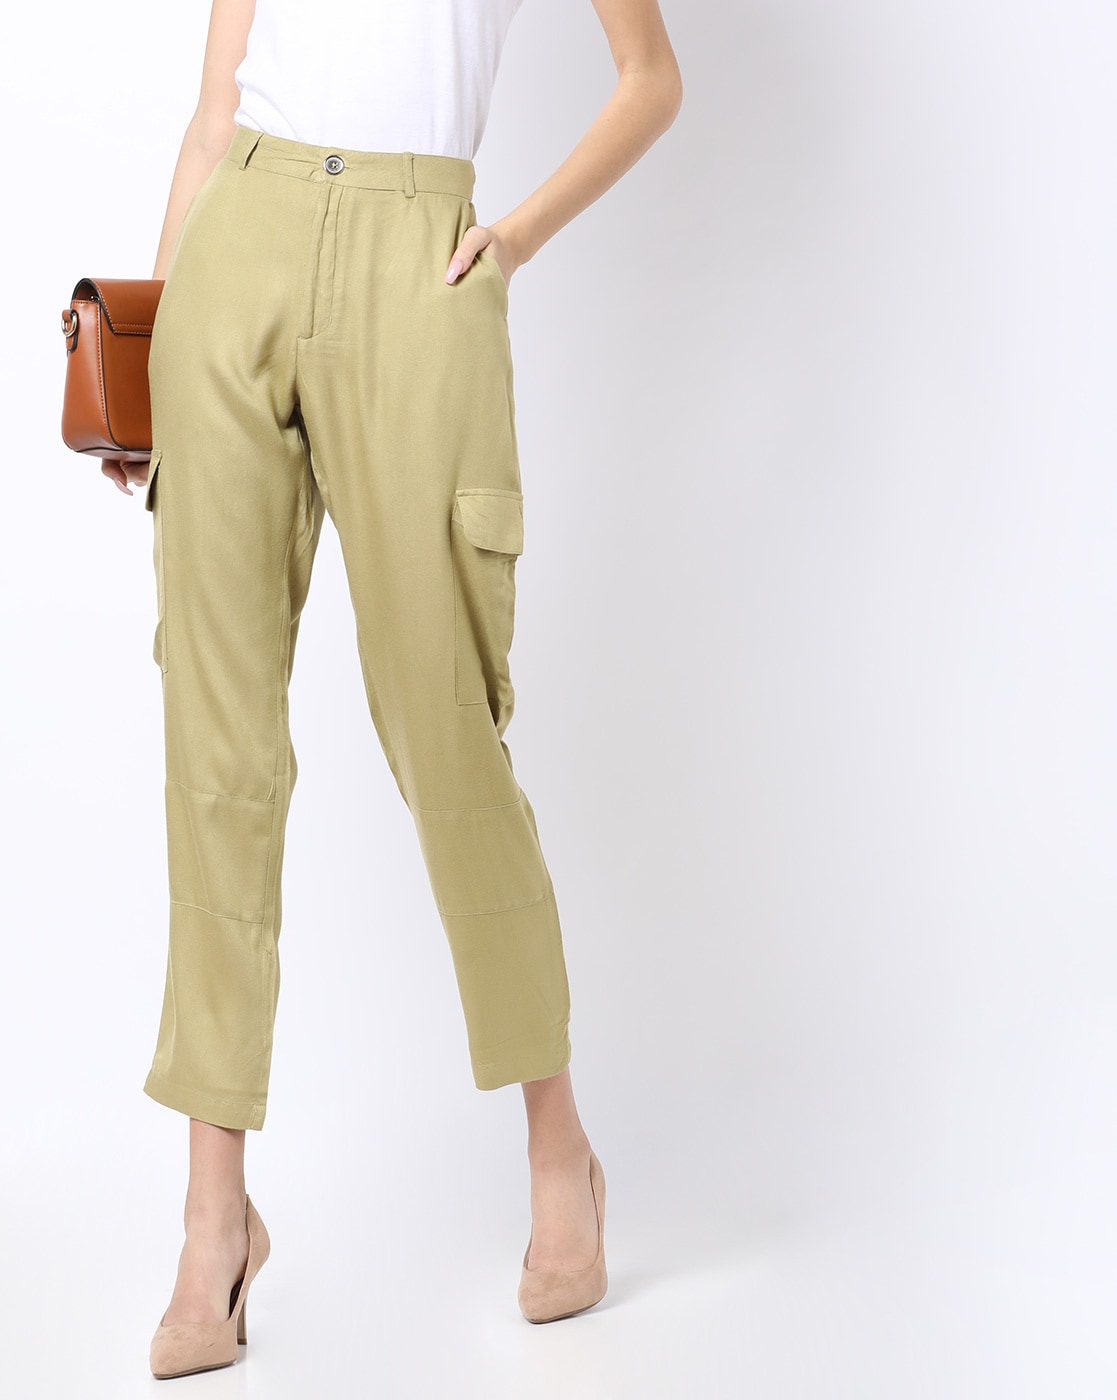 Womens Trousers - Buy Womens Trousers Online Starting at Just ₹179 | Meesho